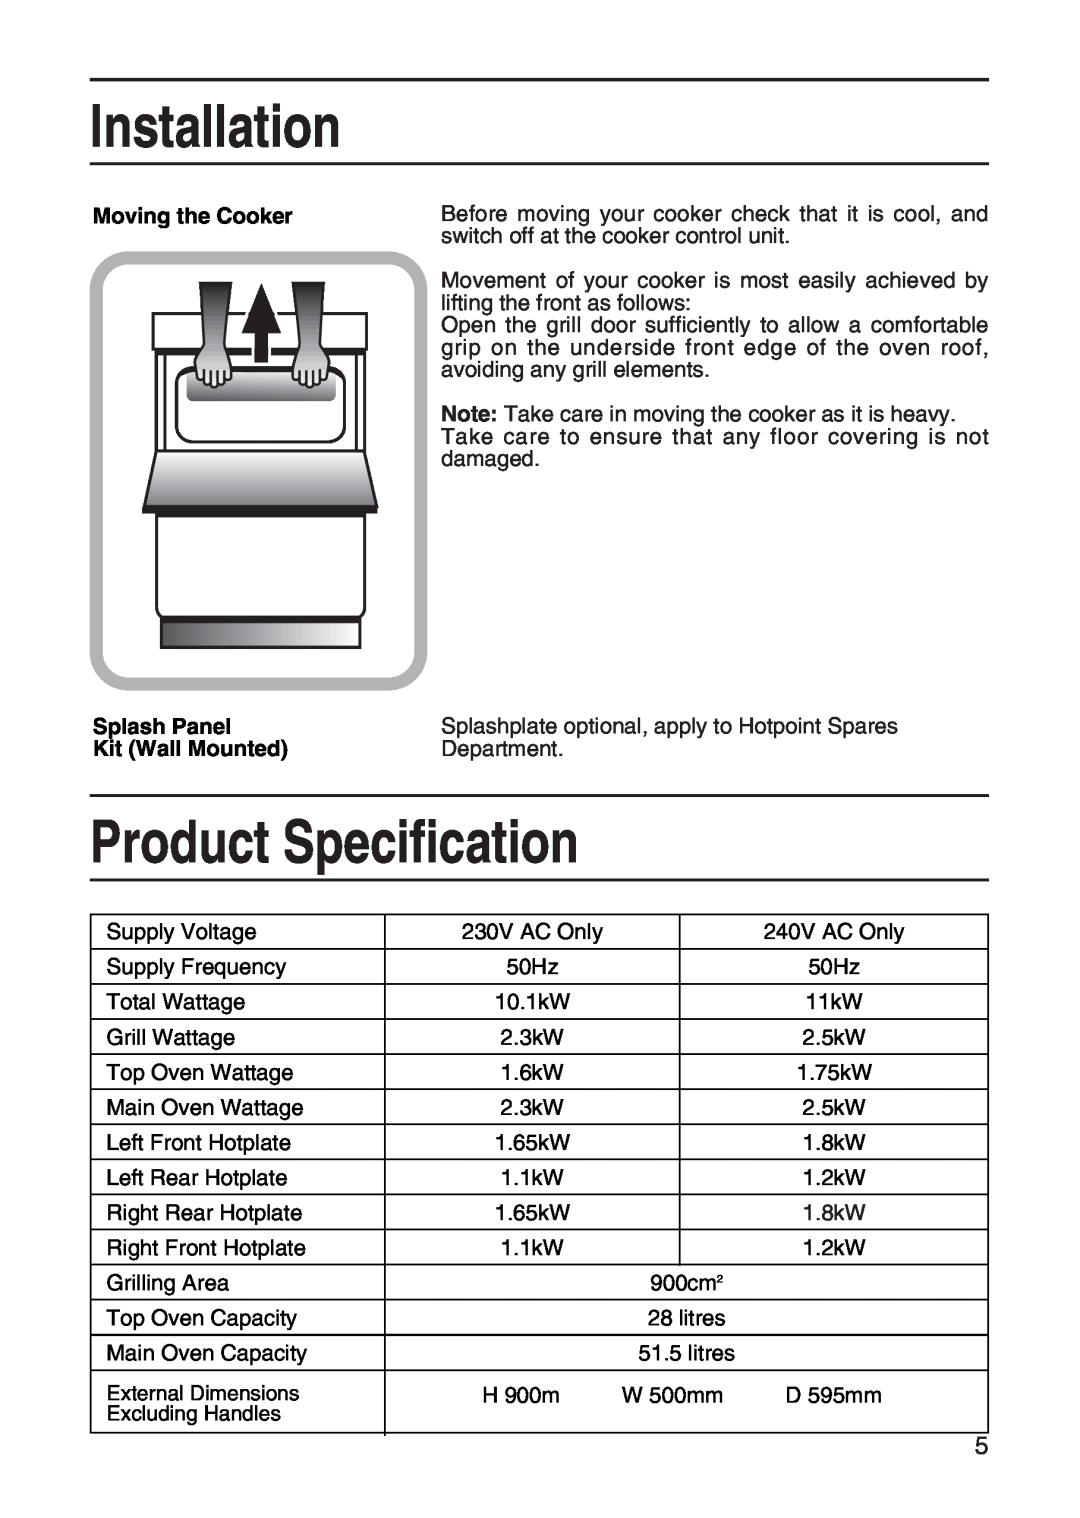 Hotpoint EW41 manual Product Specification, Installation, Moving the Cooker Splash Panel Kit Wall Mounted 